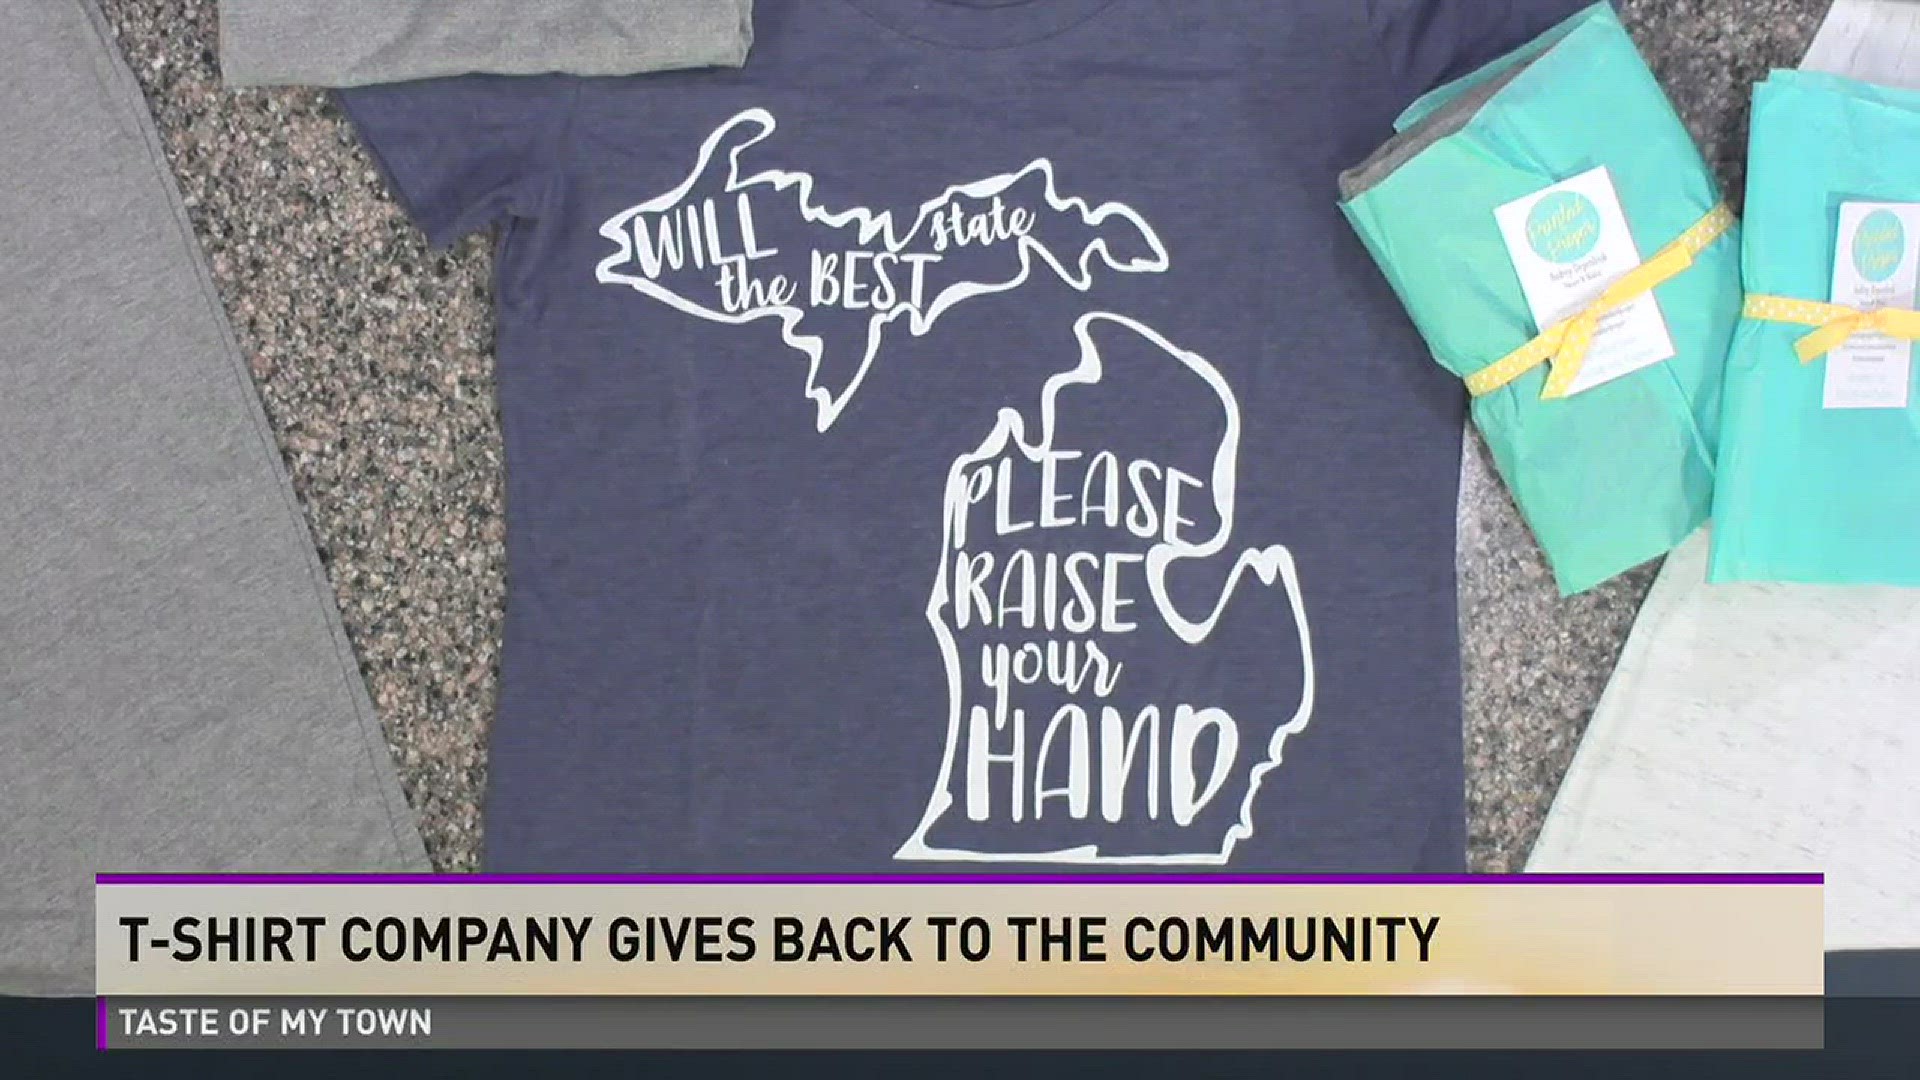 T-Shirt Company Gives back to Community